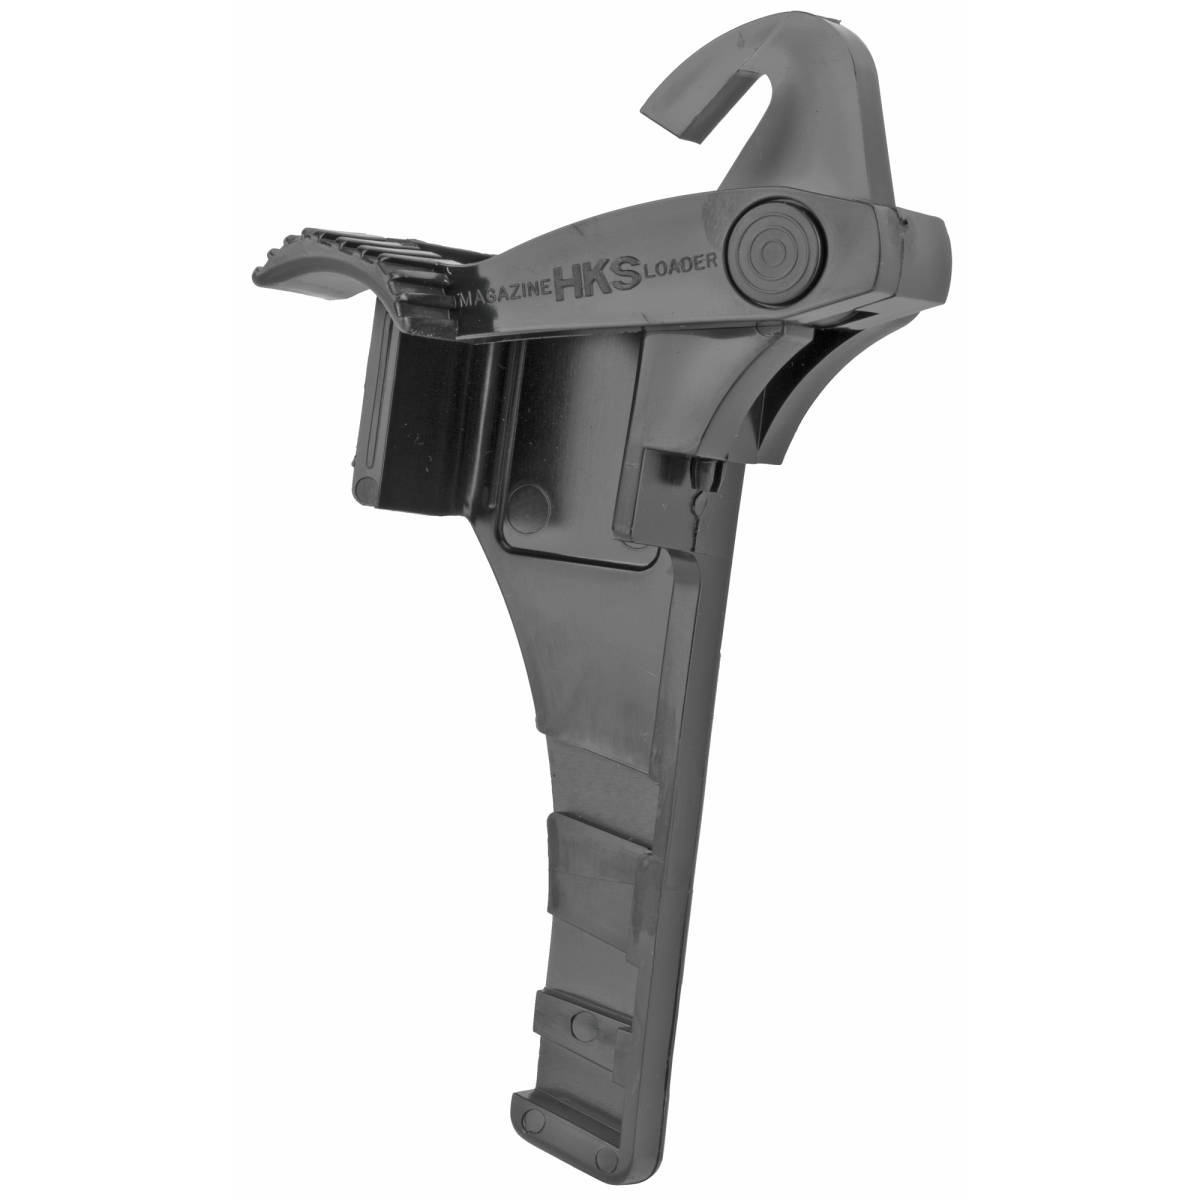 HKS GL940 Double Stack Mag Loader Made of Plastic with Black Finish for...-img-1